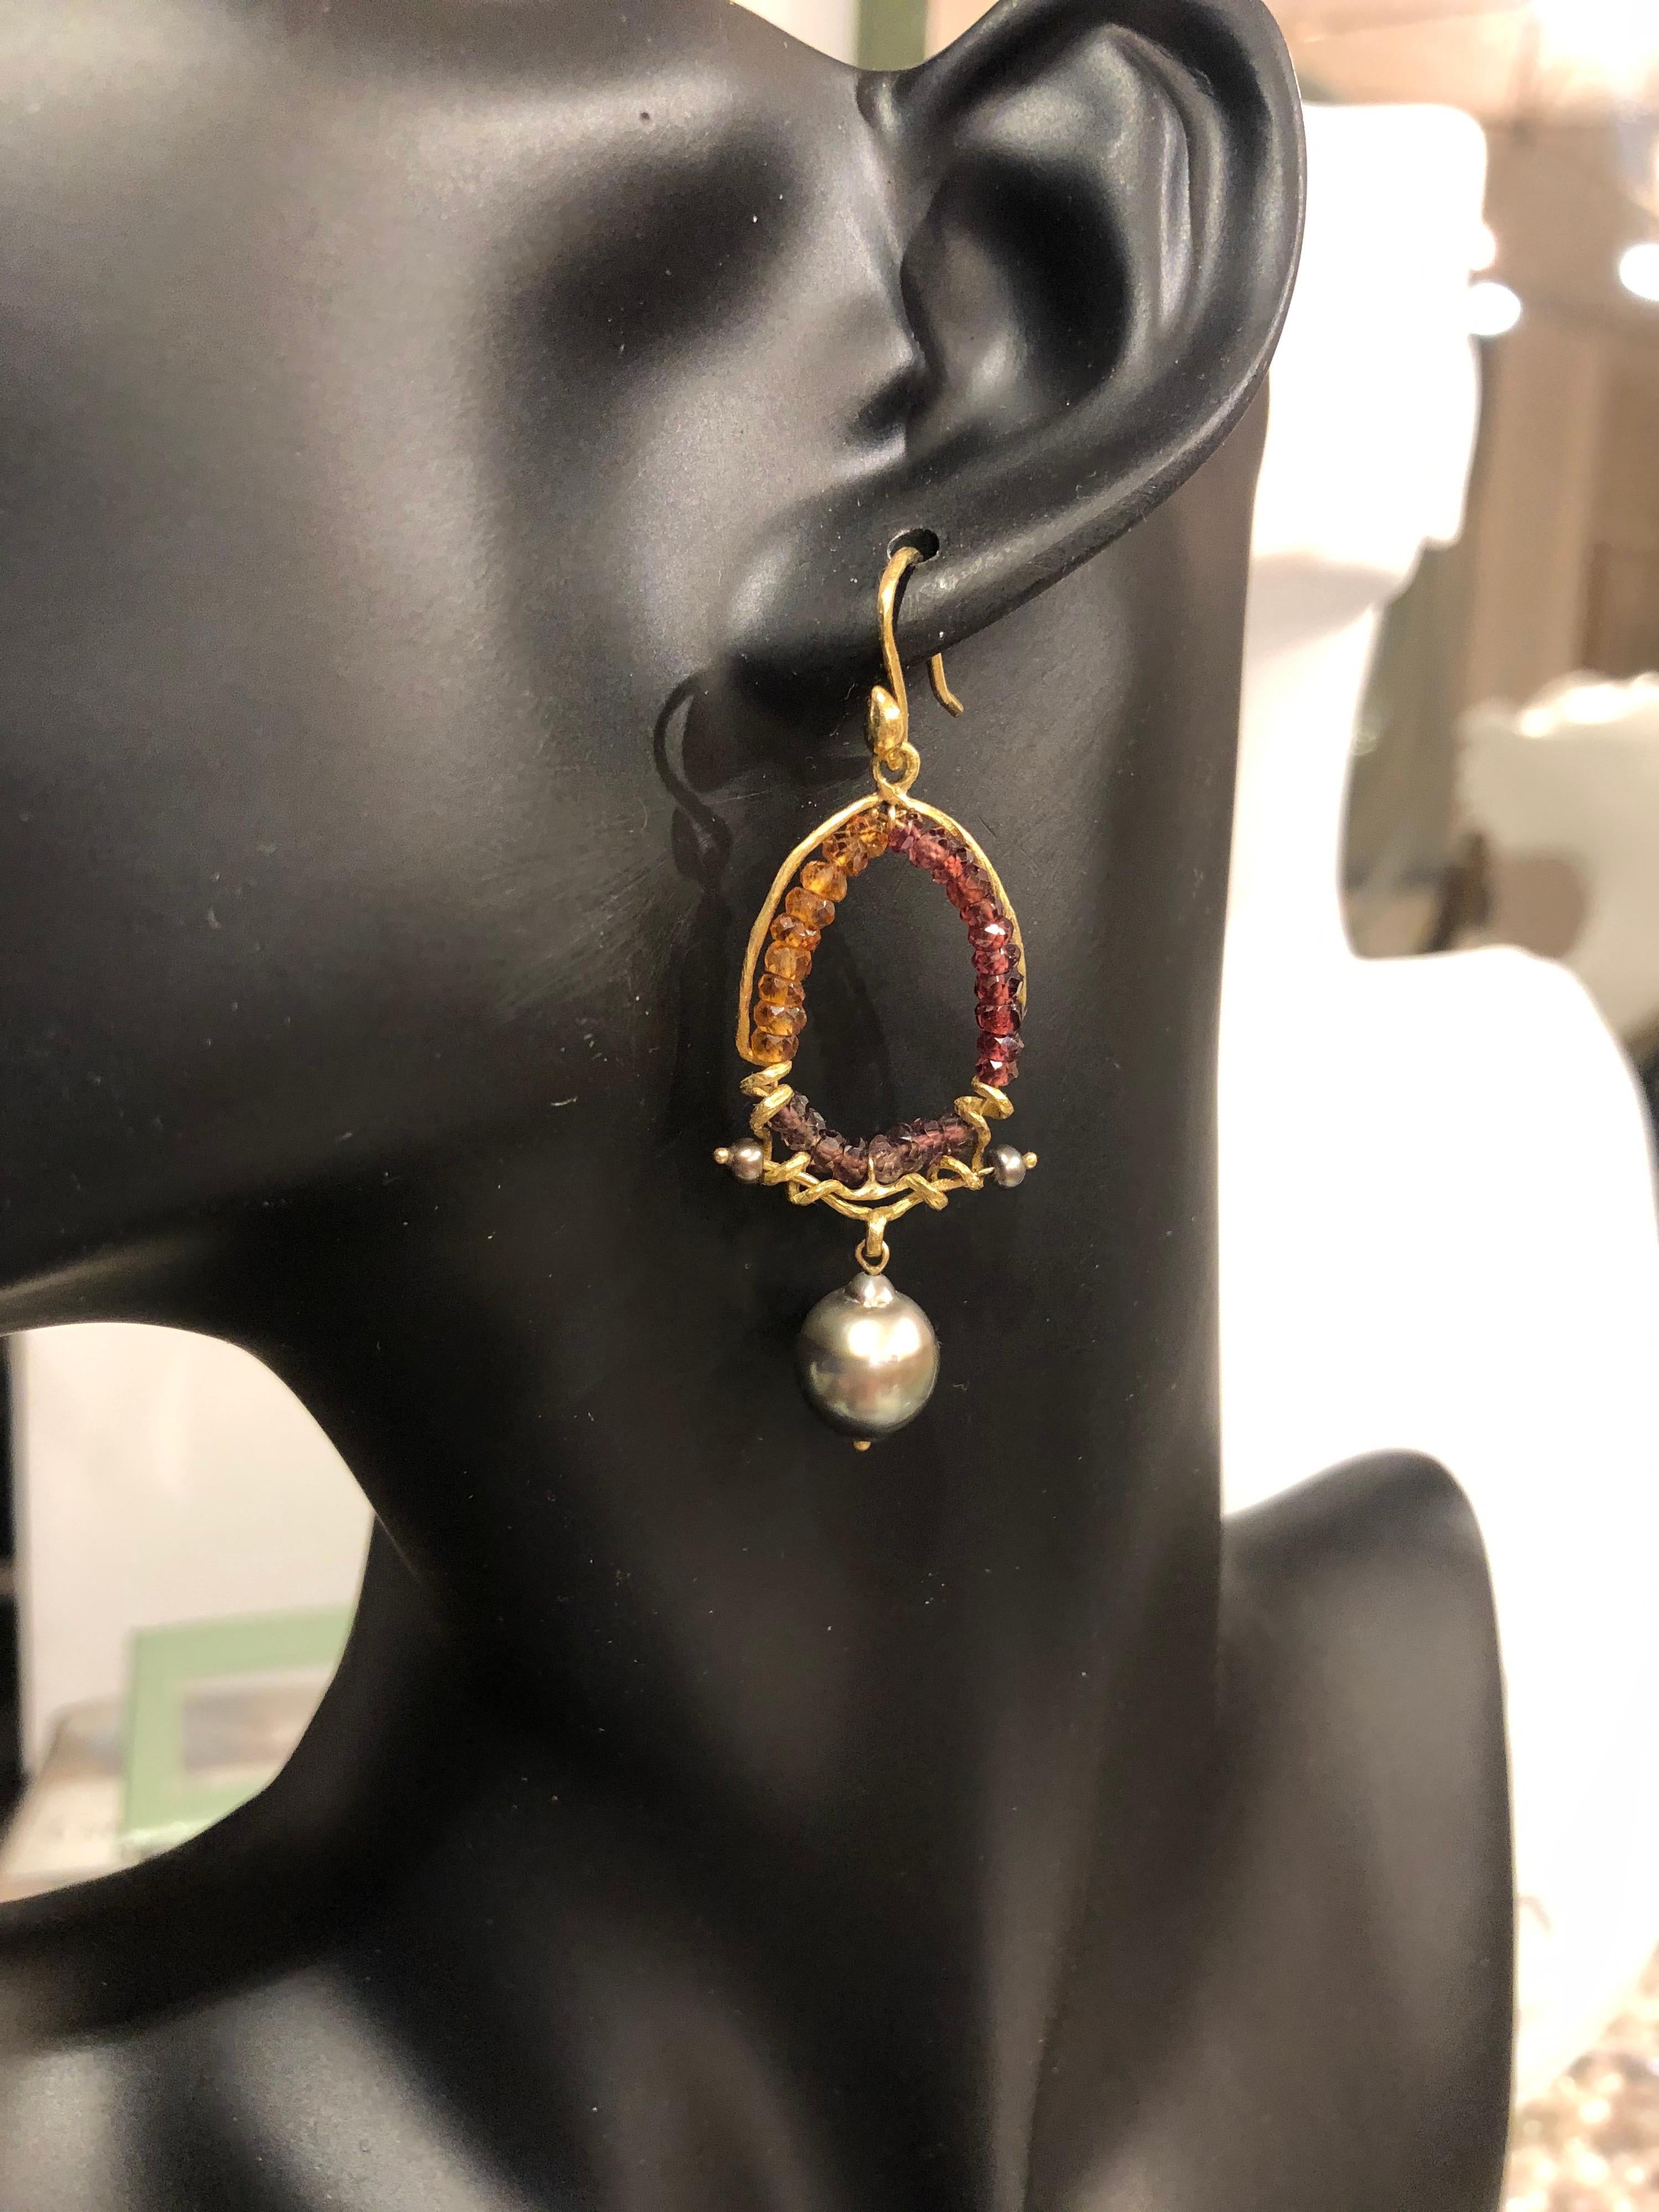 It's not easy to compete with black Tahitian pearls and their smoky glow, but, fortunately the multi-colored sapphires and pink zircon more than hold their own in this sculptural, hand-cast earring twined with 18k vines. A true Gabrielle original.